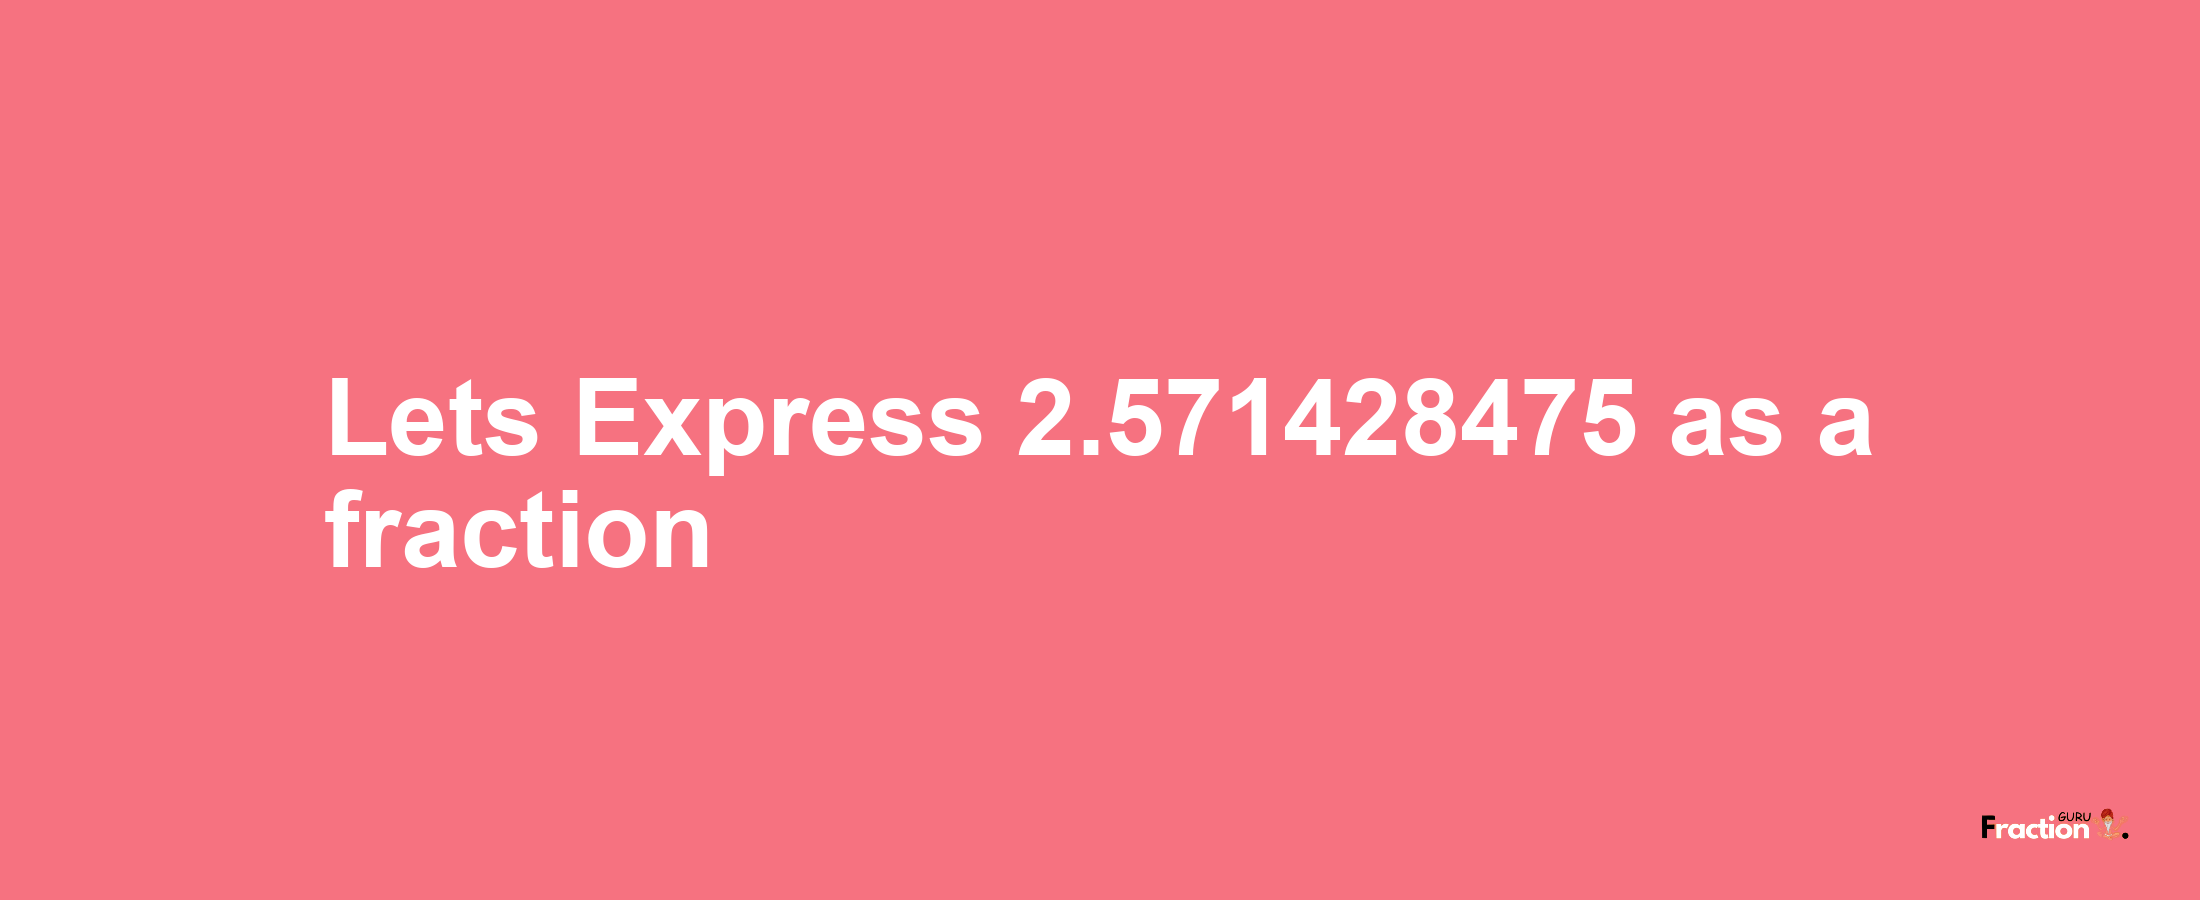 Lets Express 2.571428475 as afraction